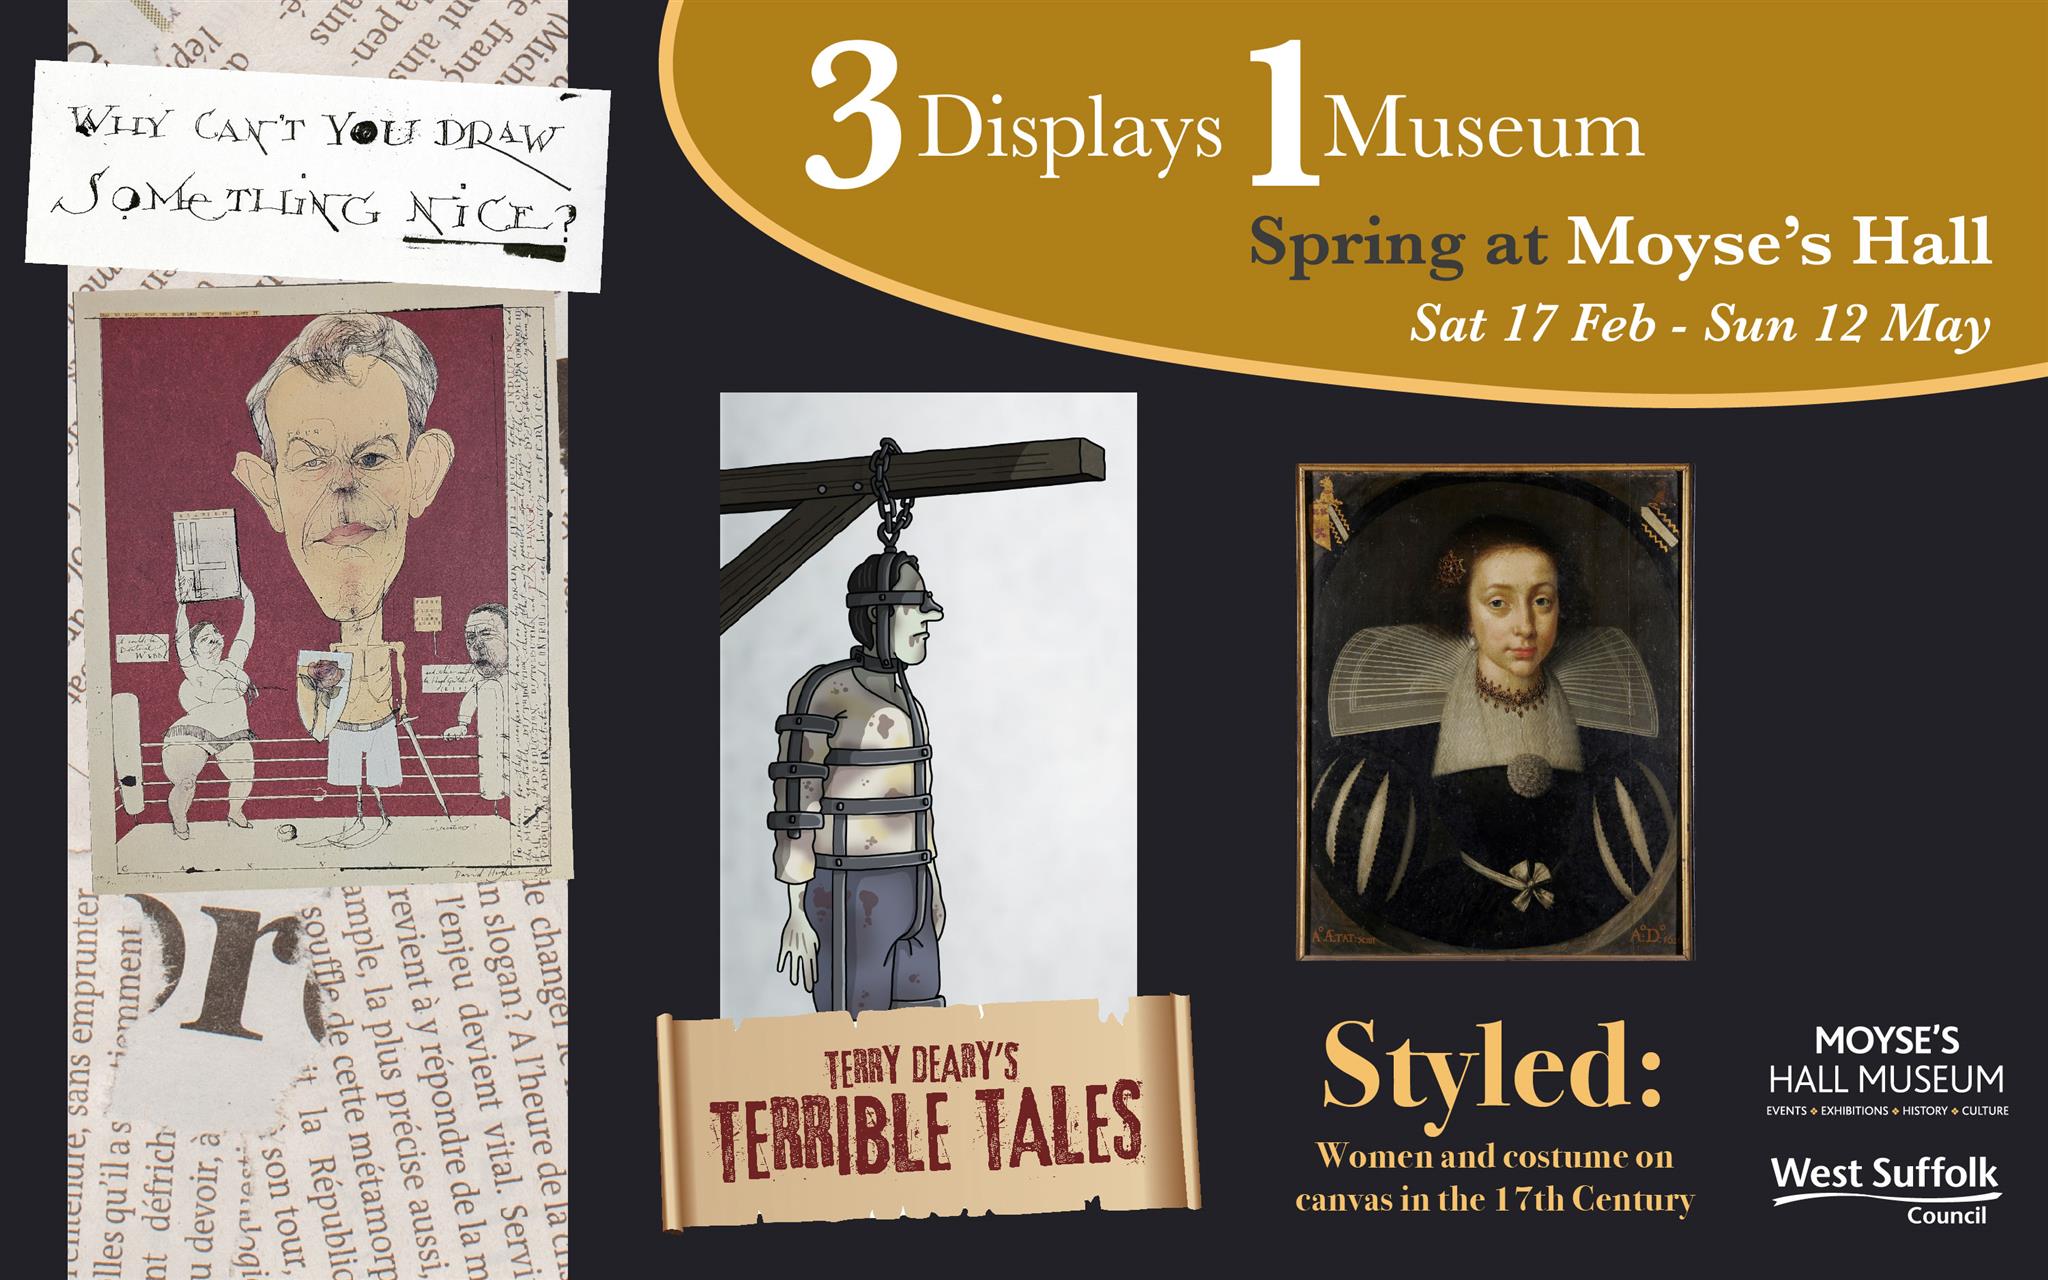 Spring at Moyse’s Hall: 3 Displays, 1 Museum